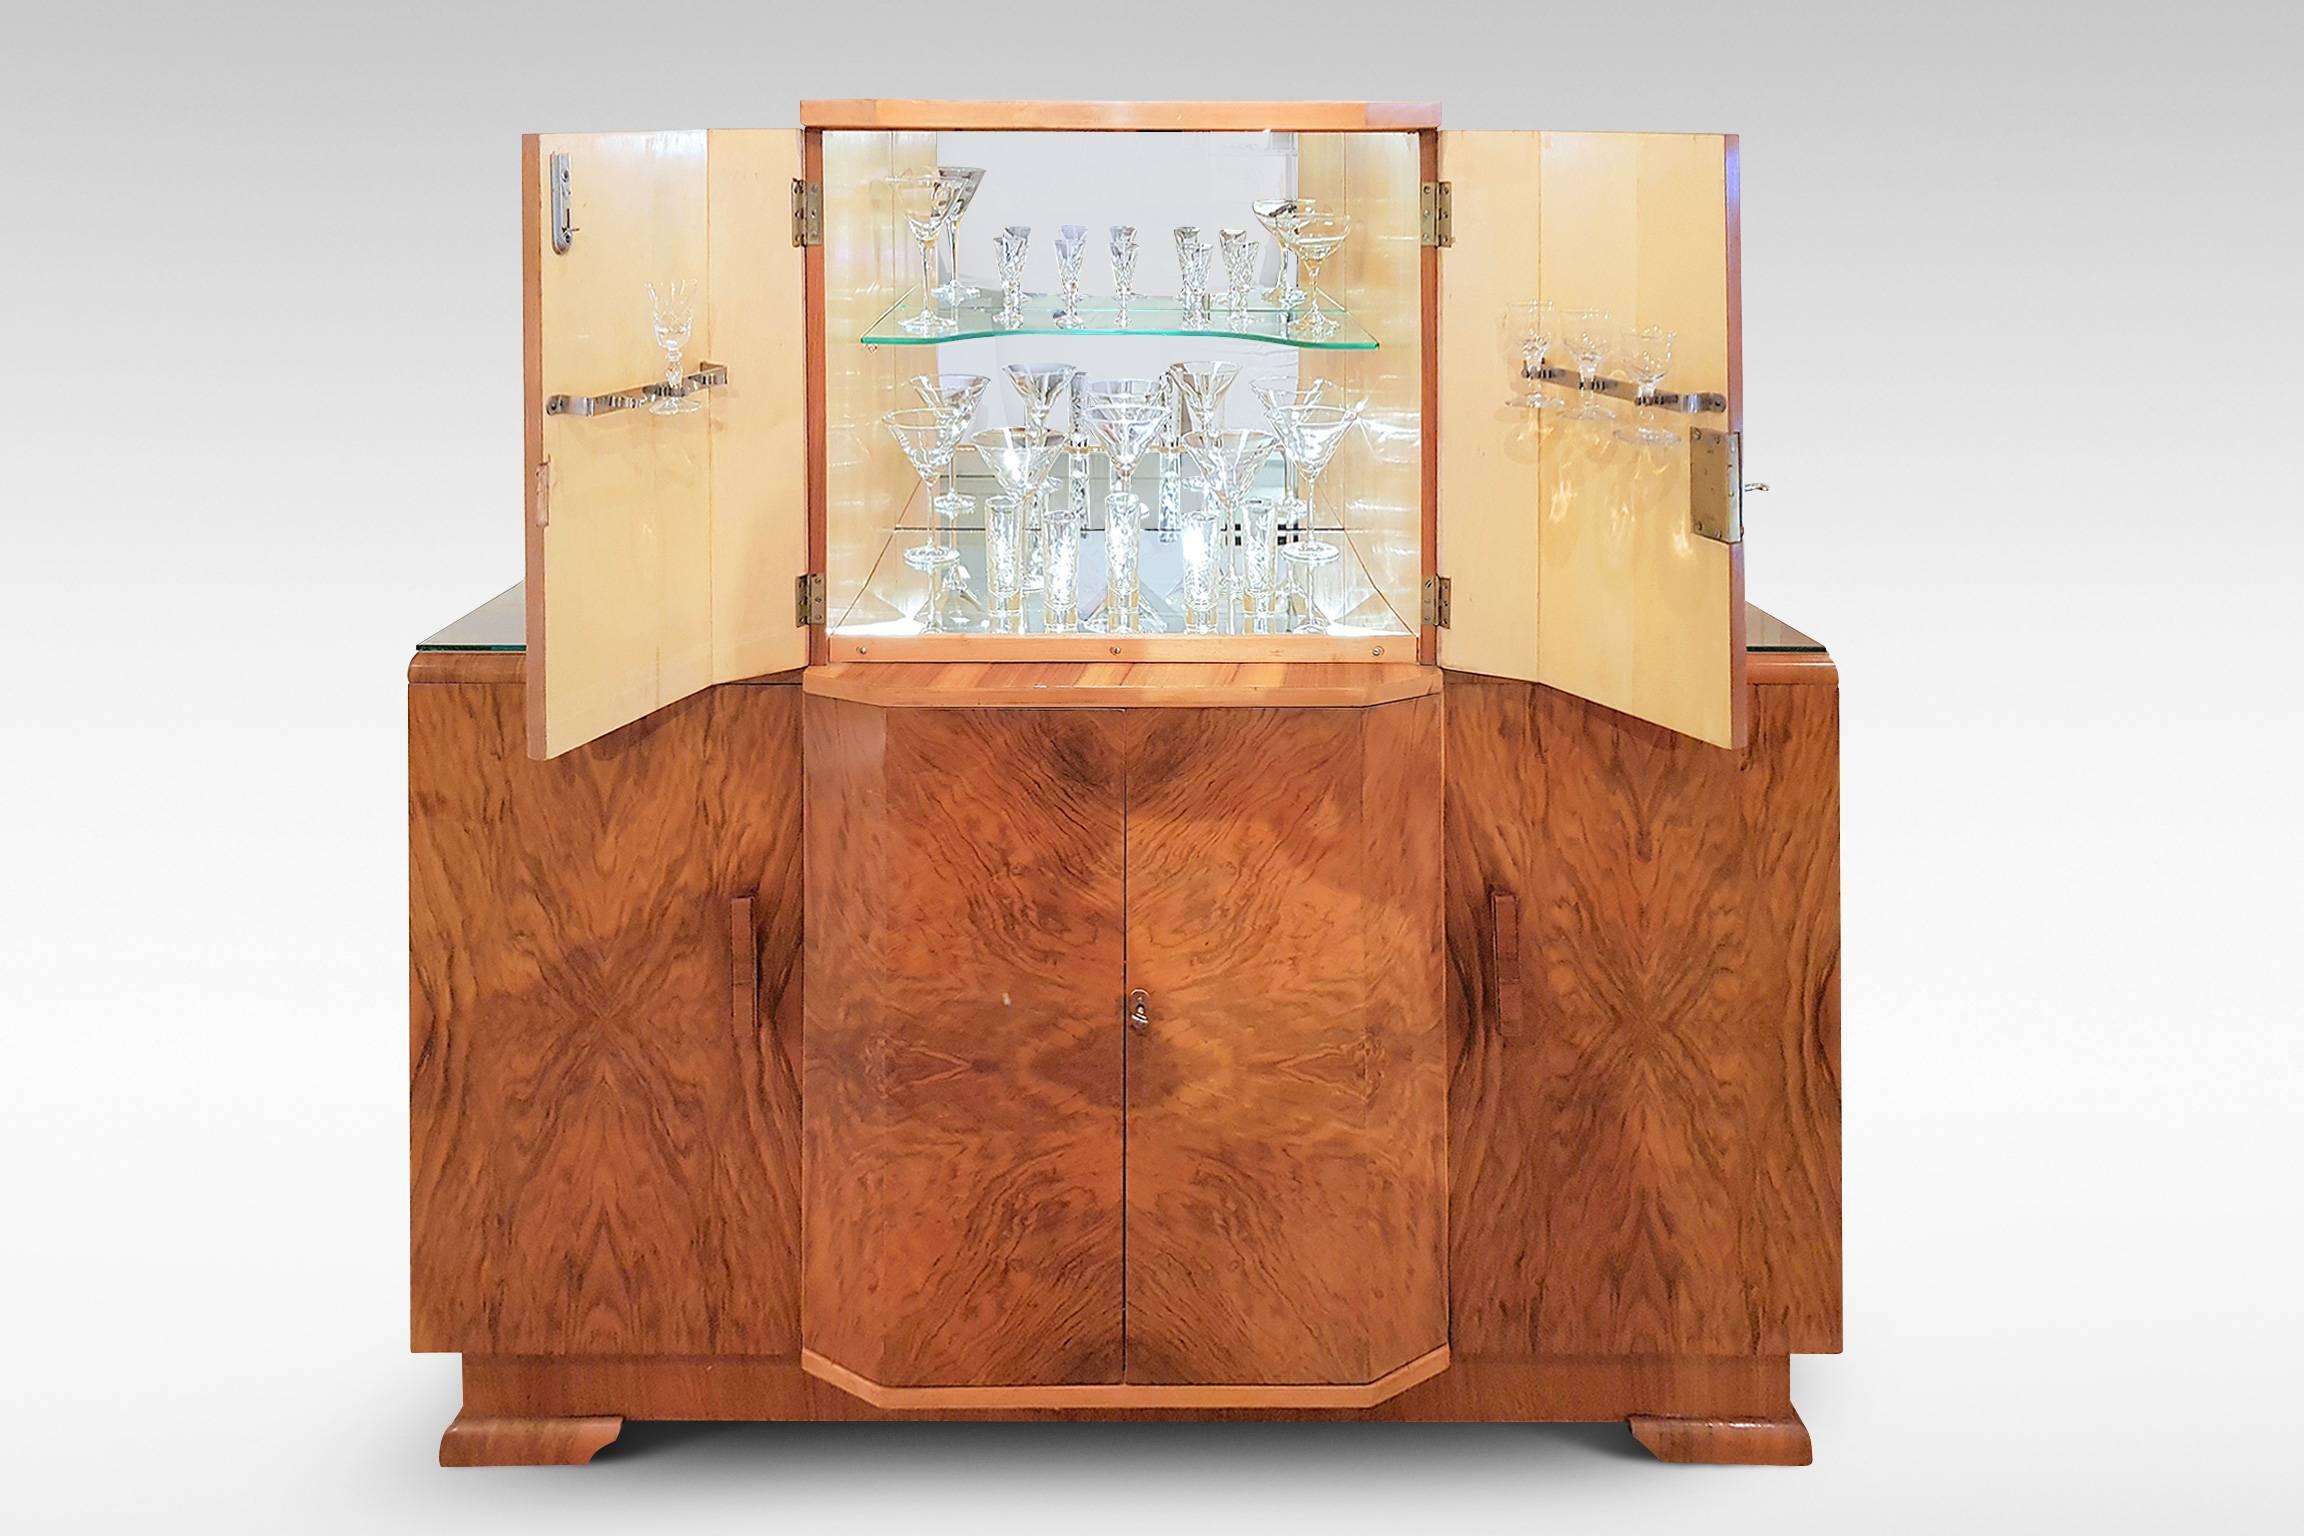 A highly versatile cocktail sideboard in walnut veneers from the Art Deco period, with mirrored and illuminated upper cabinet,
circa 1935-1955.